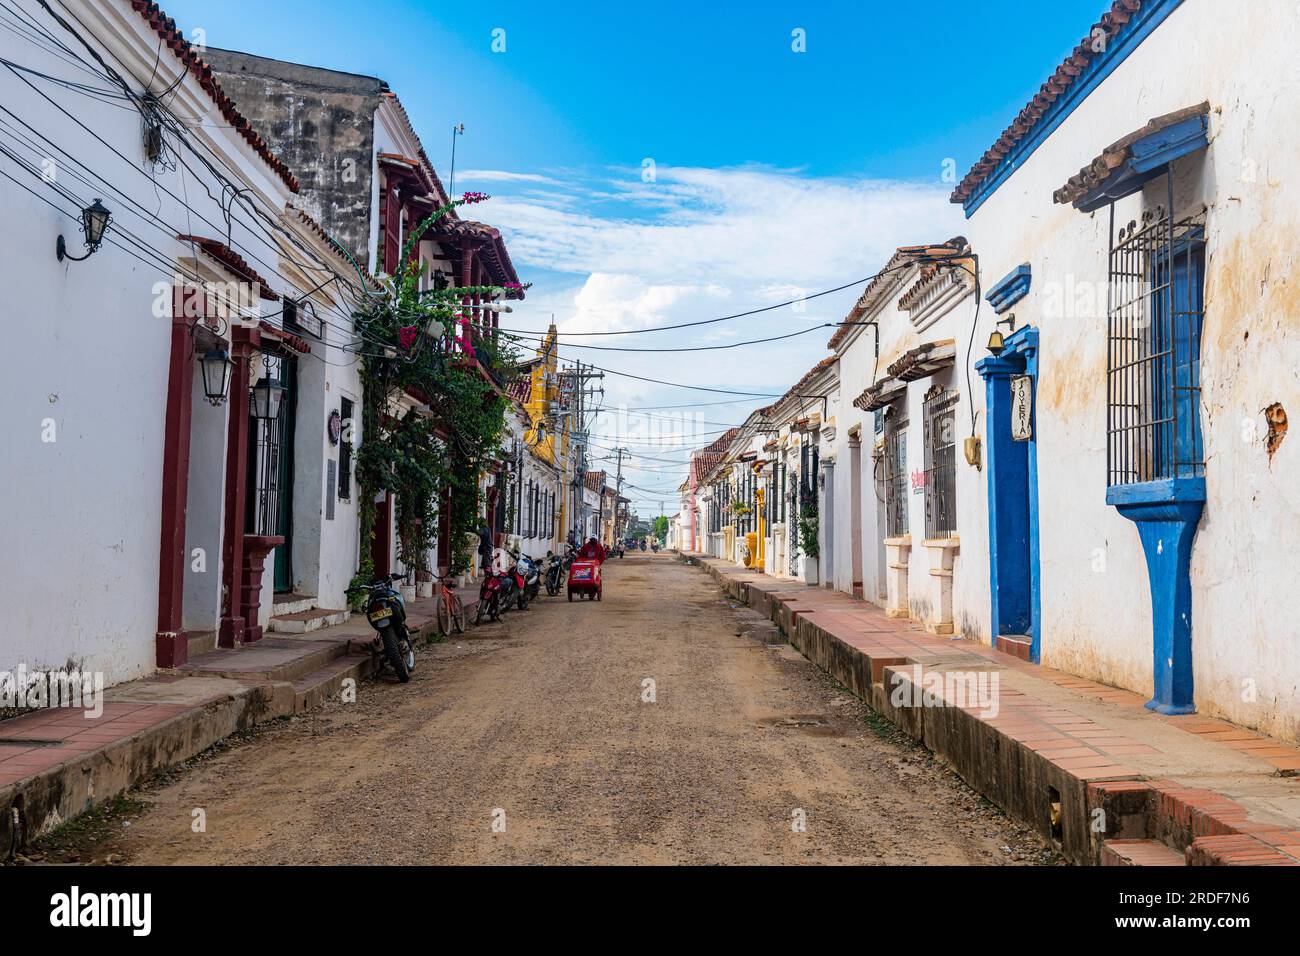 Historical center of the Unesco world heritage site, Mompox, Colombia Stock Photo